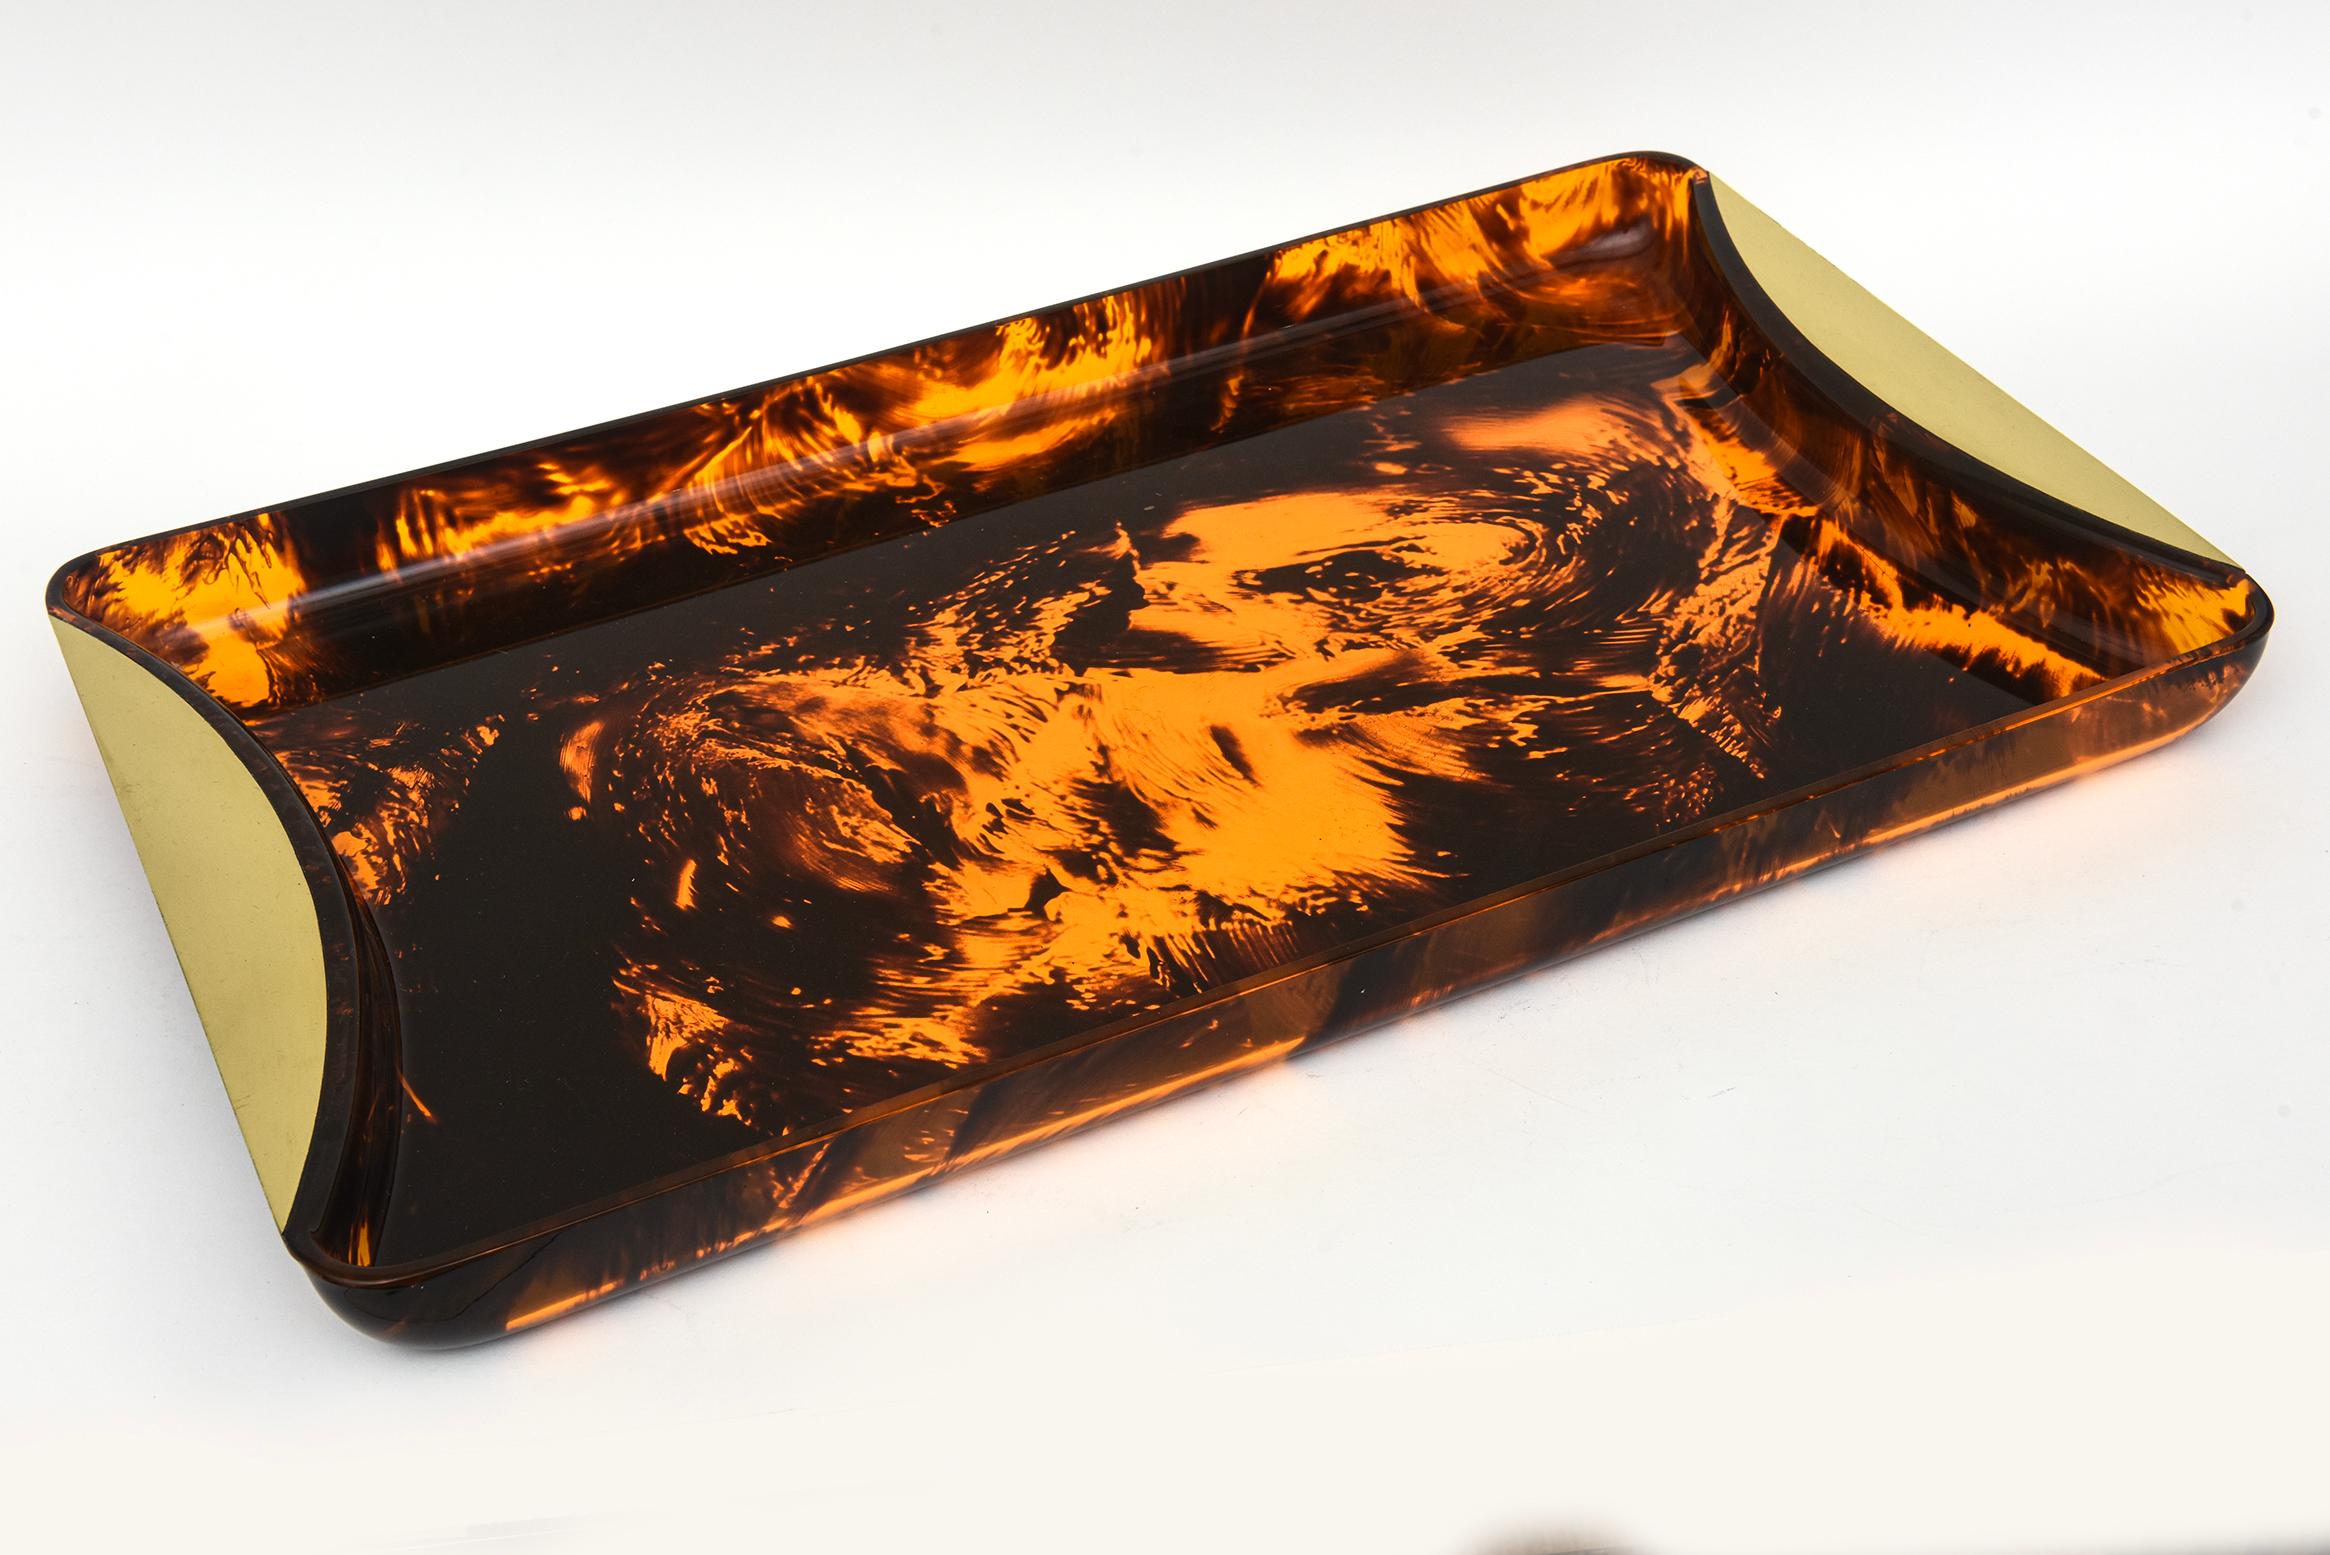 This vintage Rede Guzzini Italian faux tortoise lucite tray with brass handles has been professionally polished both on the brass and lucite. This makes for great barware and serving needs. The tortoise swirled affect of the lucite gives dimension.